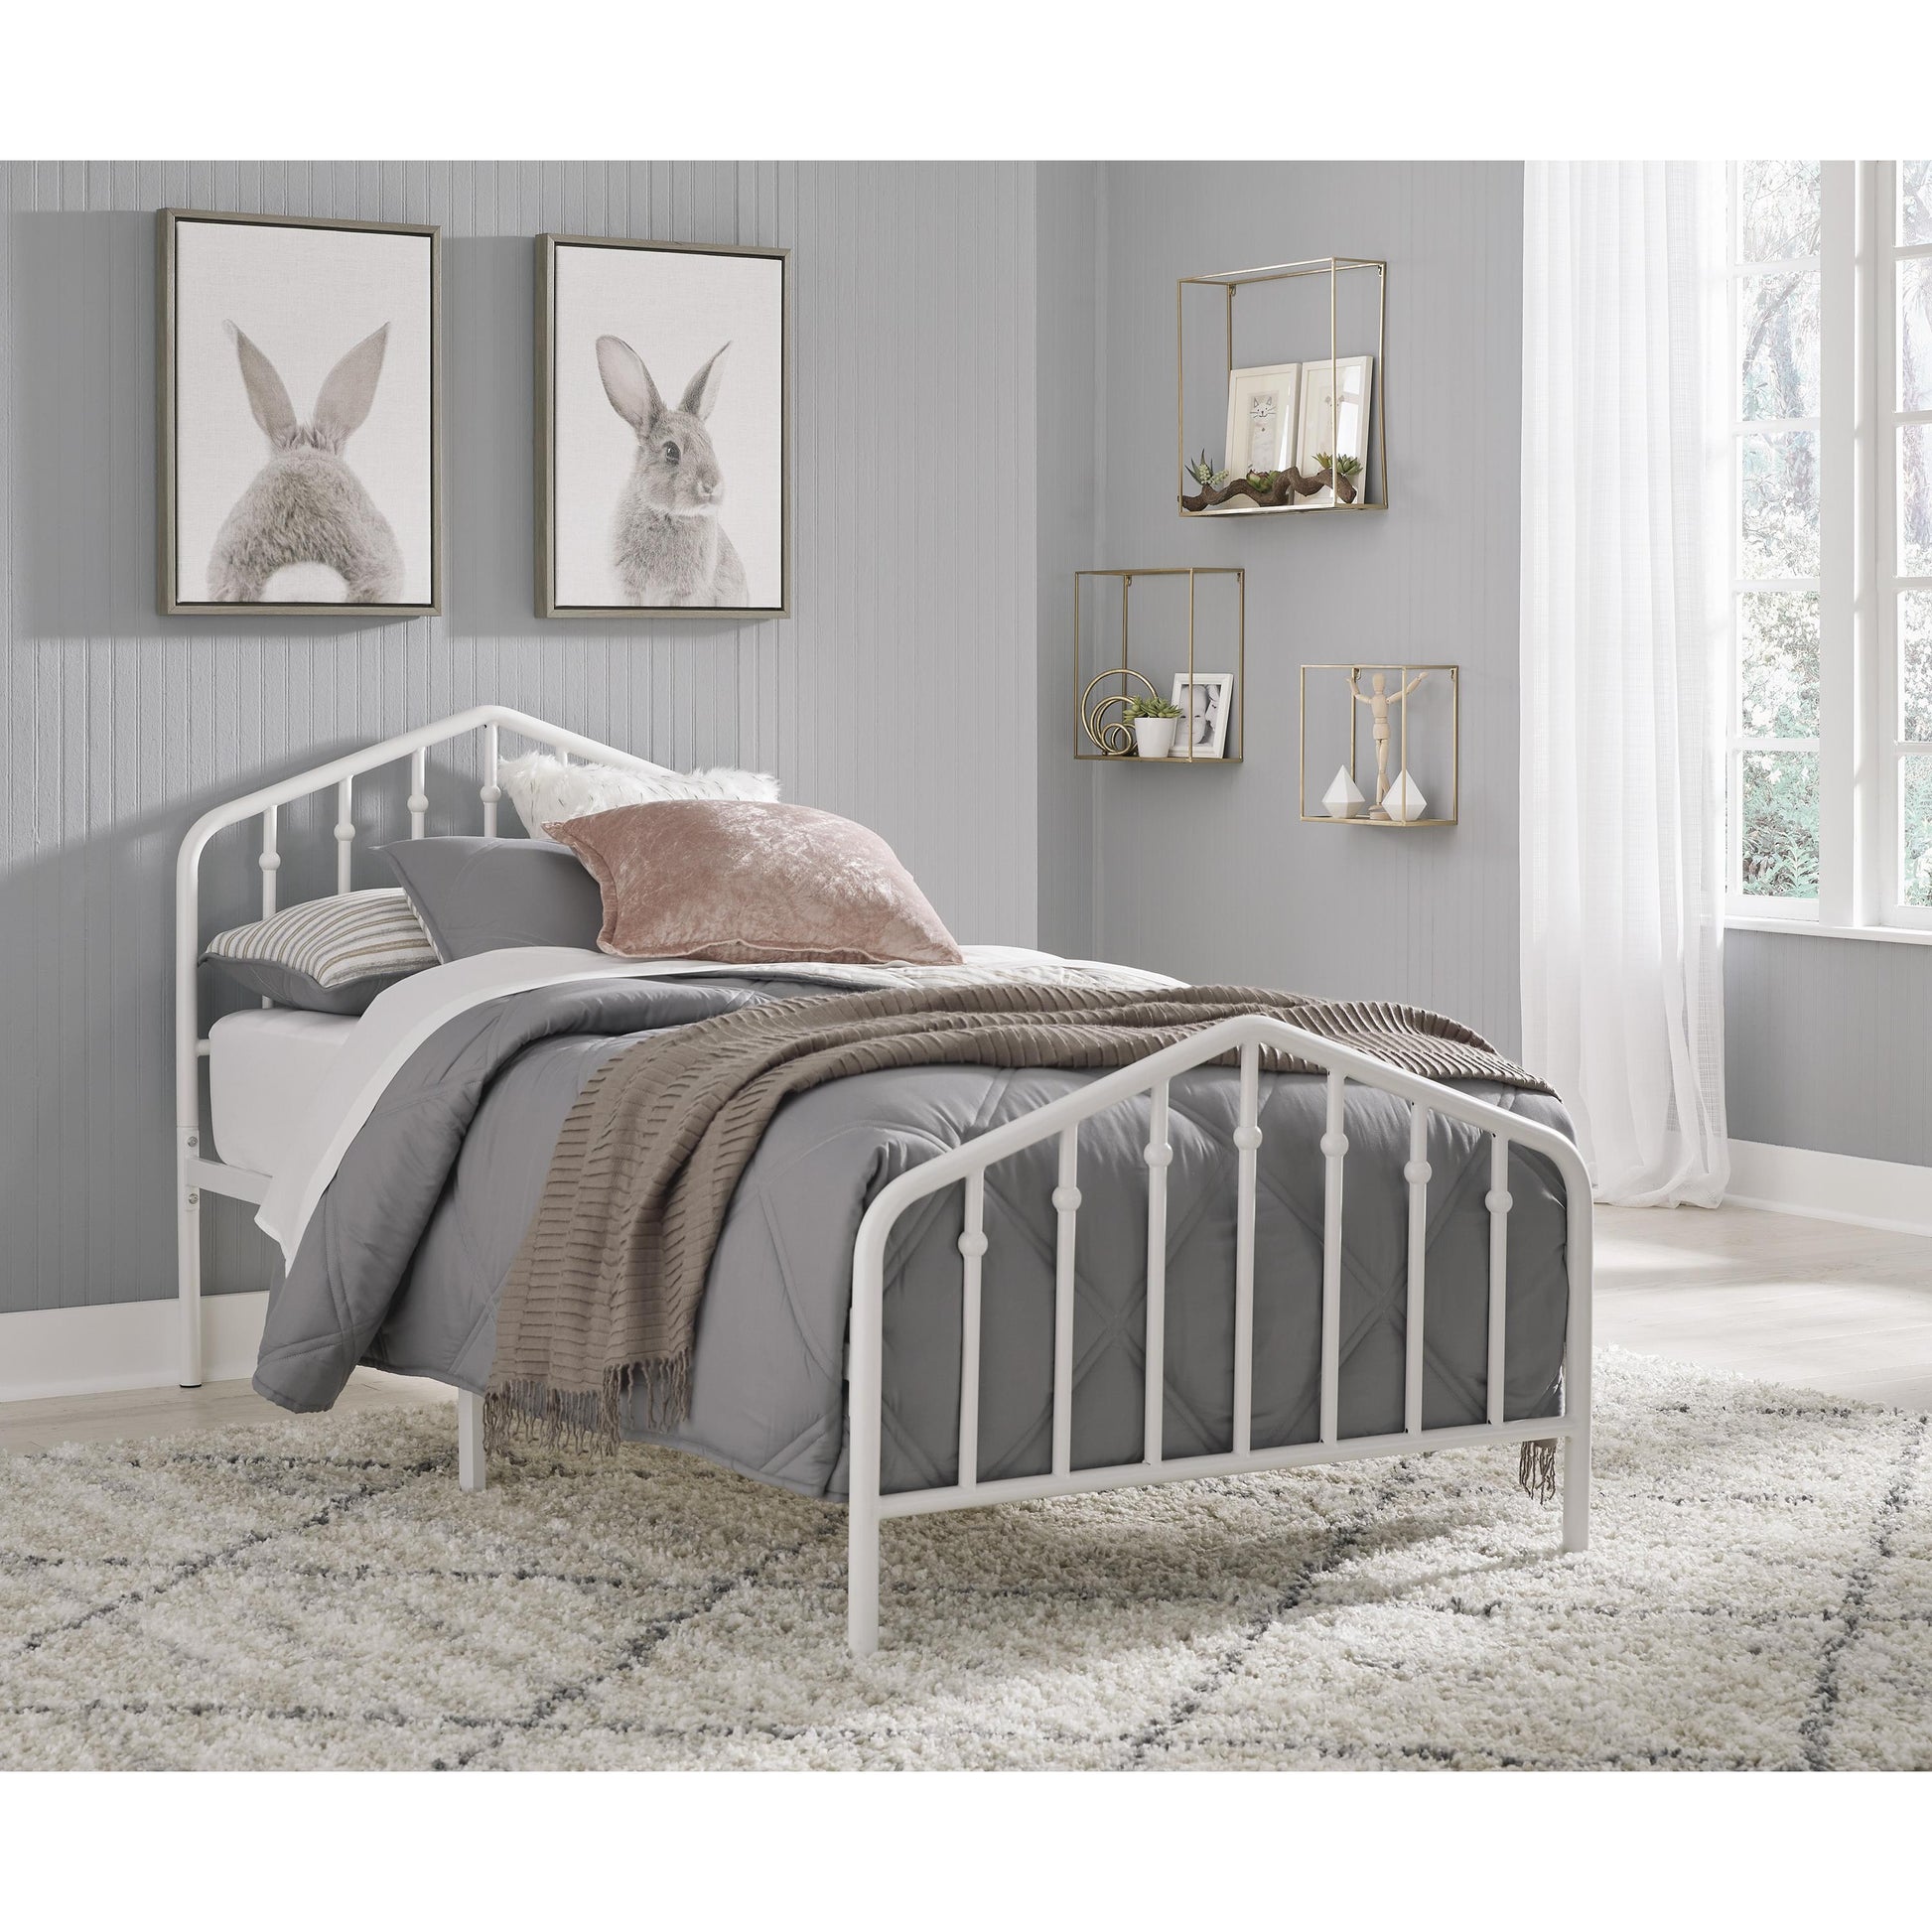 Signature Design by Ashley Kids Beds Bed B076-671 IMAGE 7